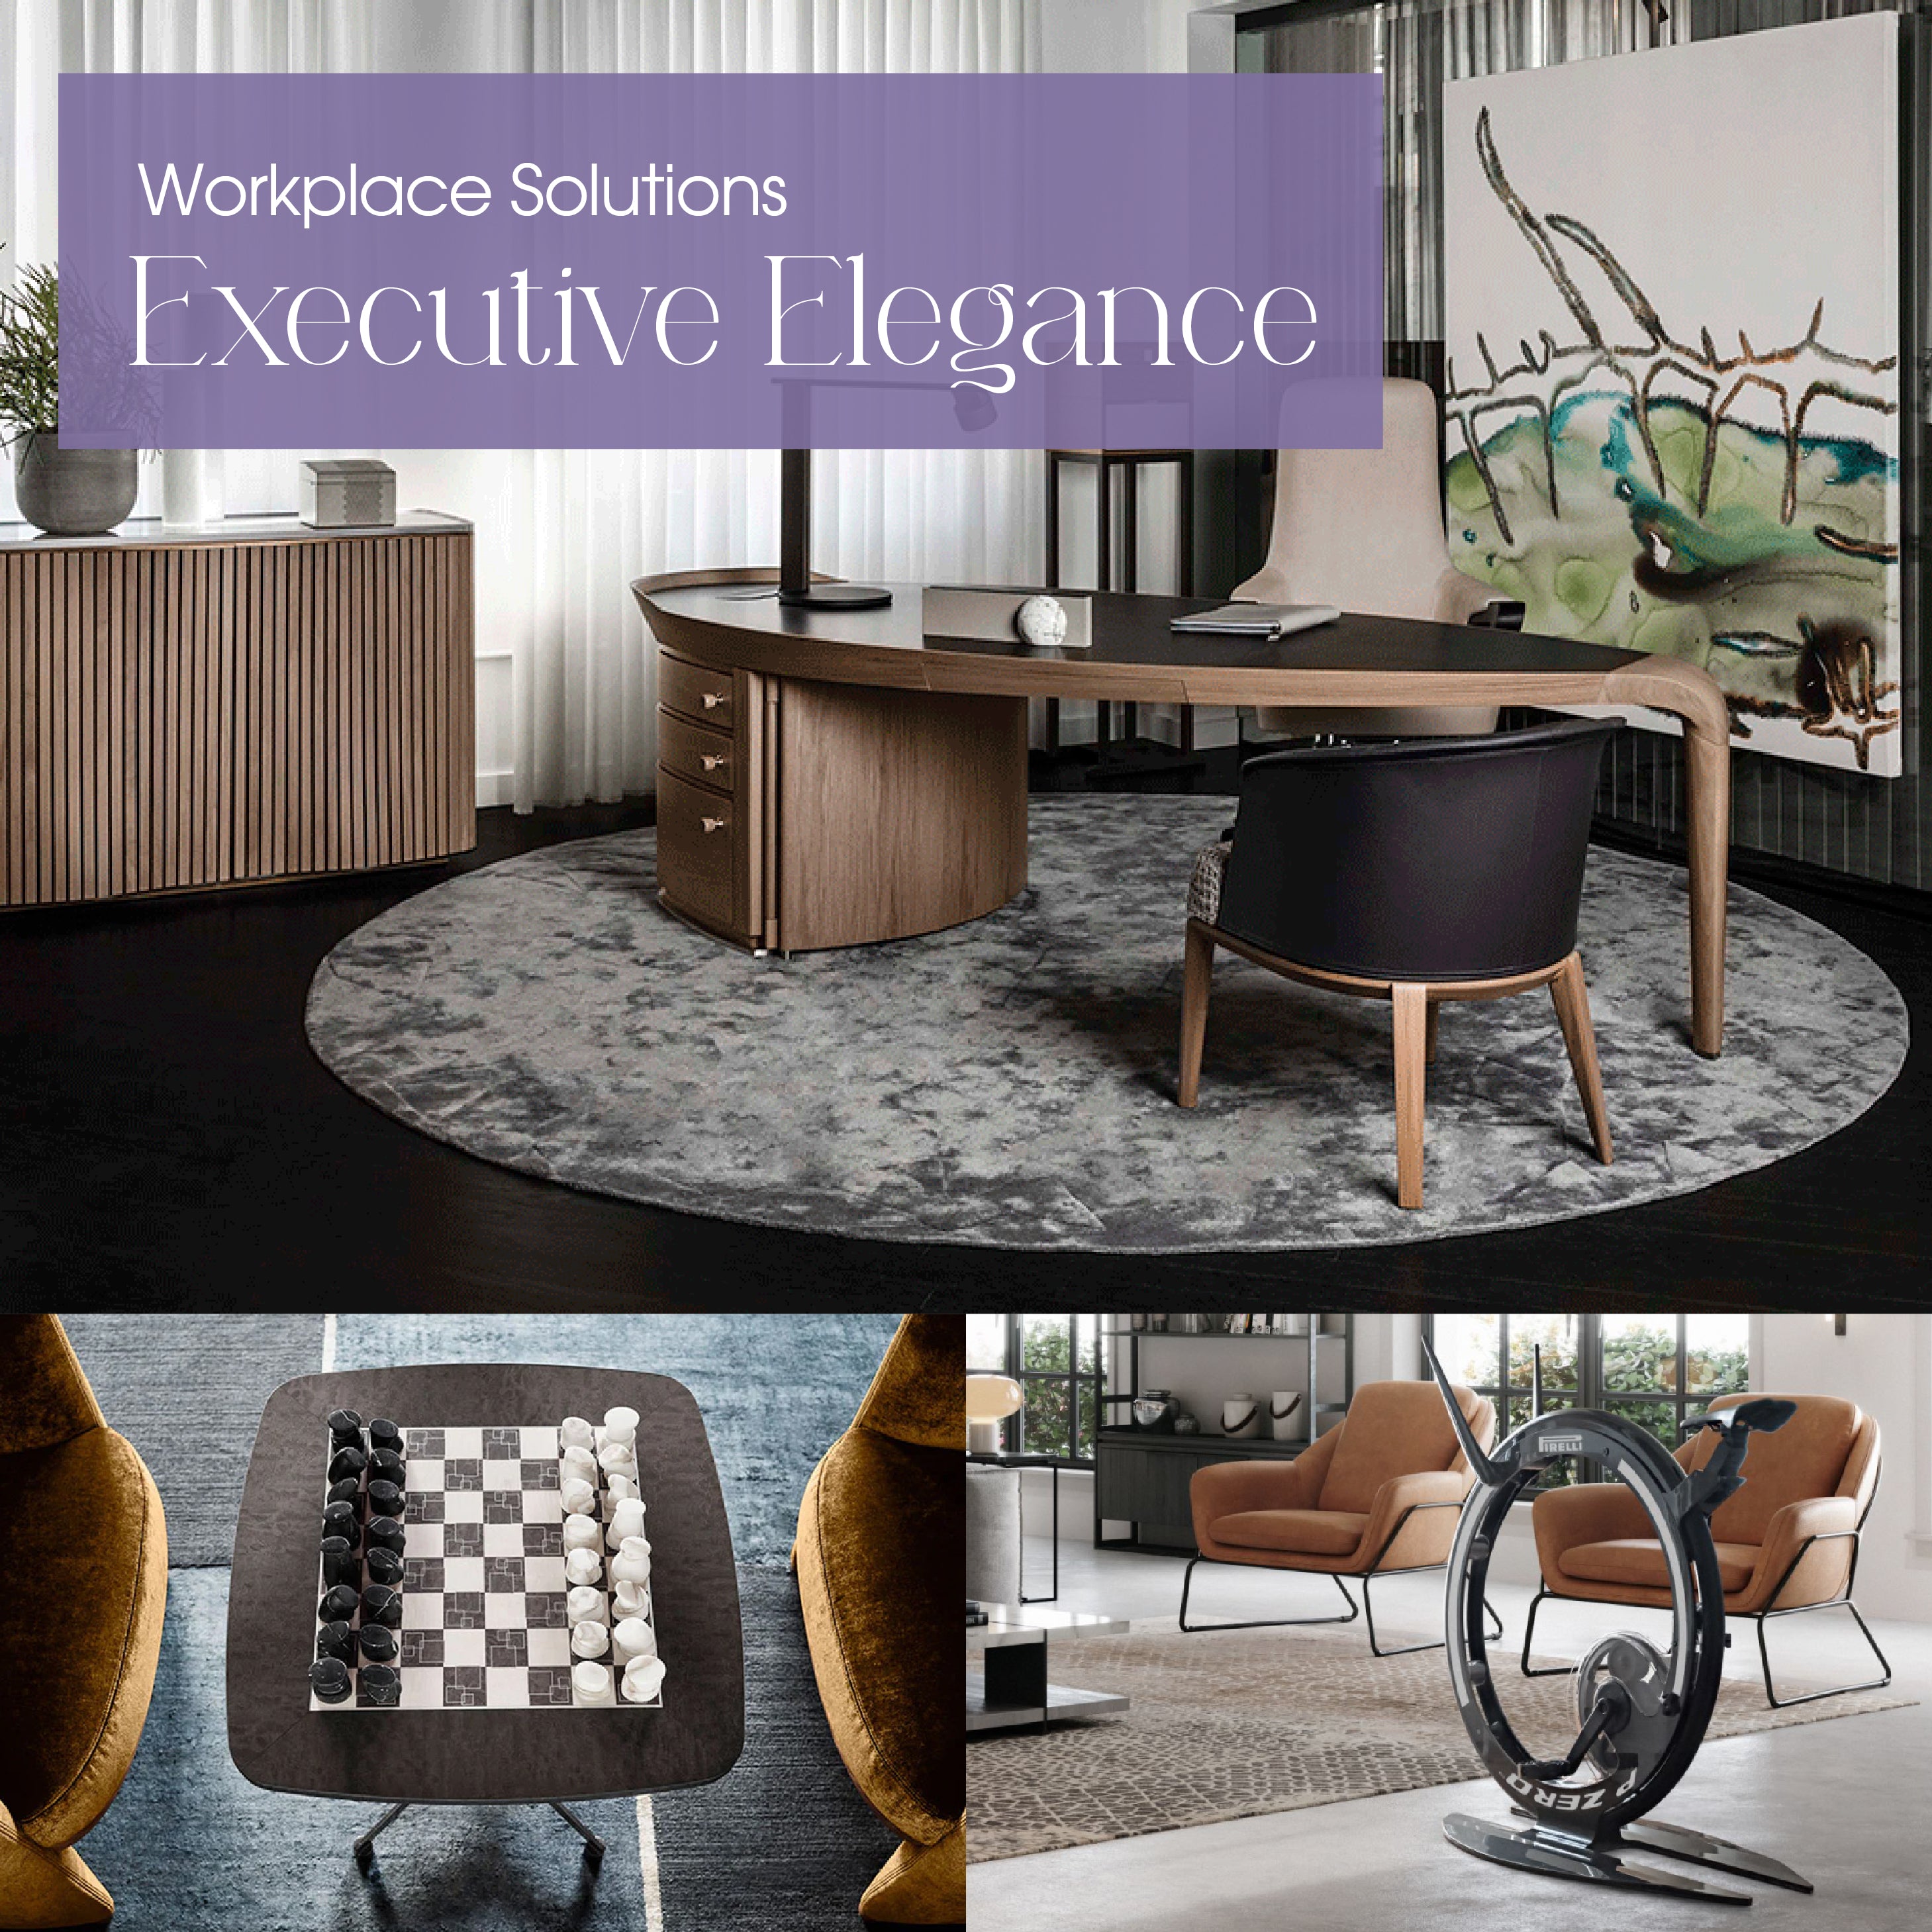 COLOURLIVING | WORKPLACE SOLUTIONS | EXECUTIVE ELEGANCE